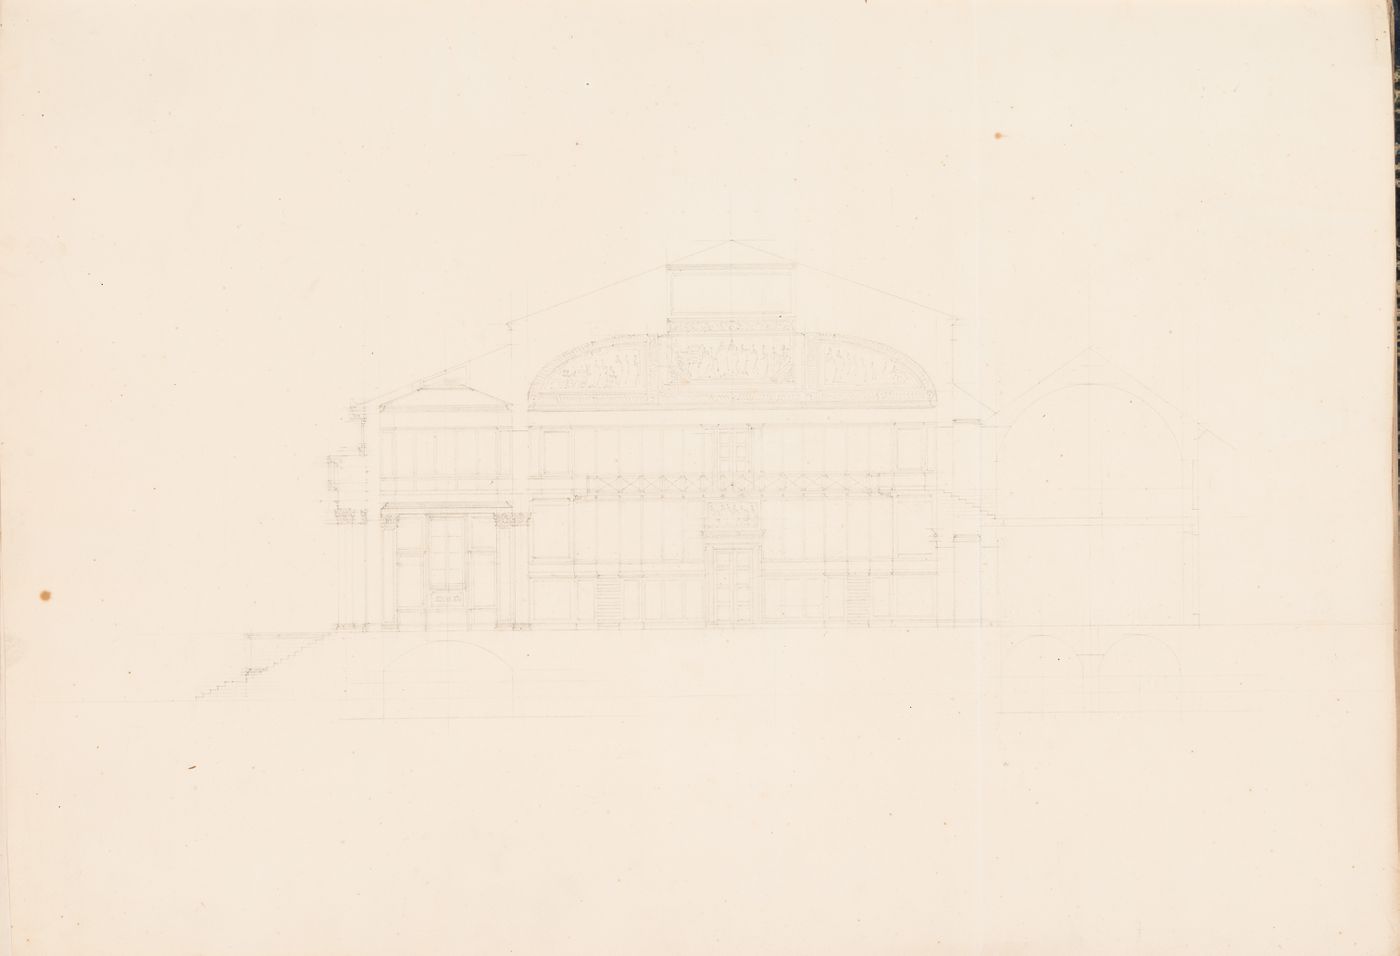 Project for a Galerie de zoologie, possibly 1838: Section